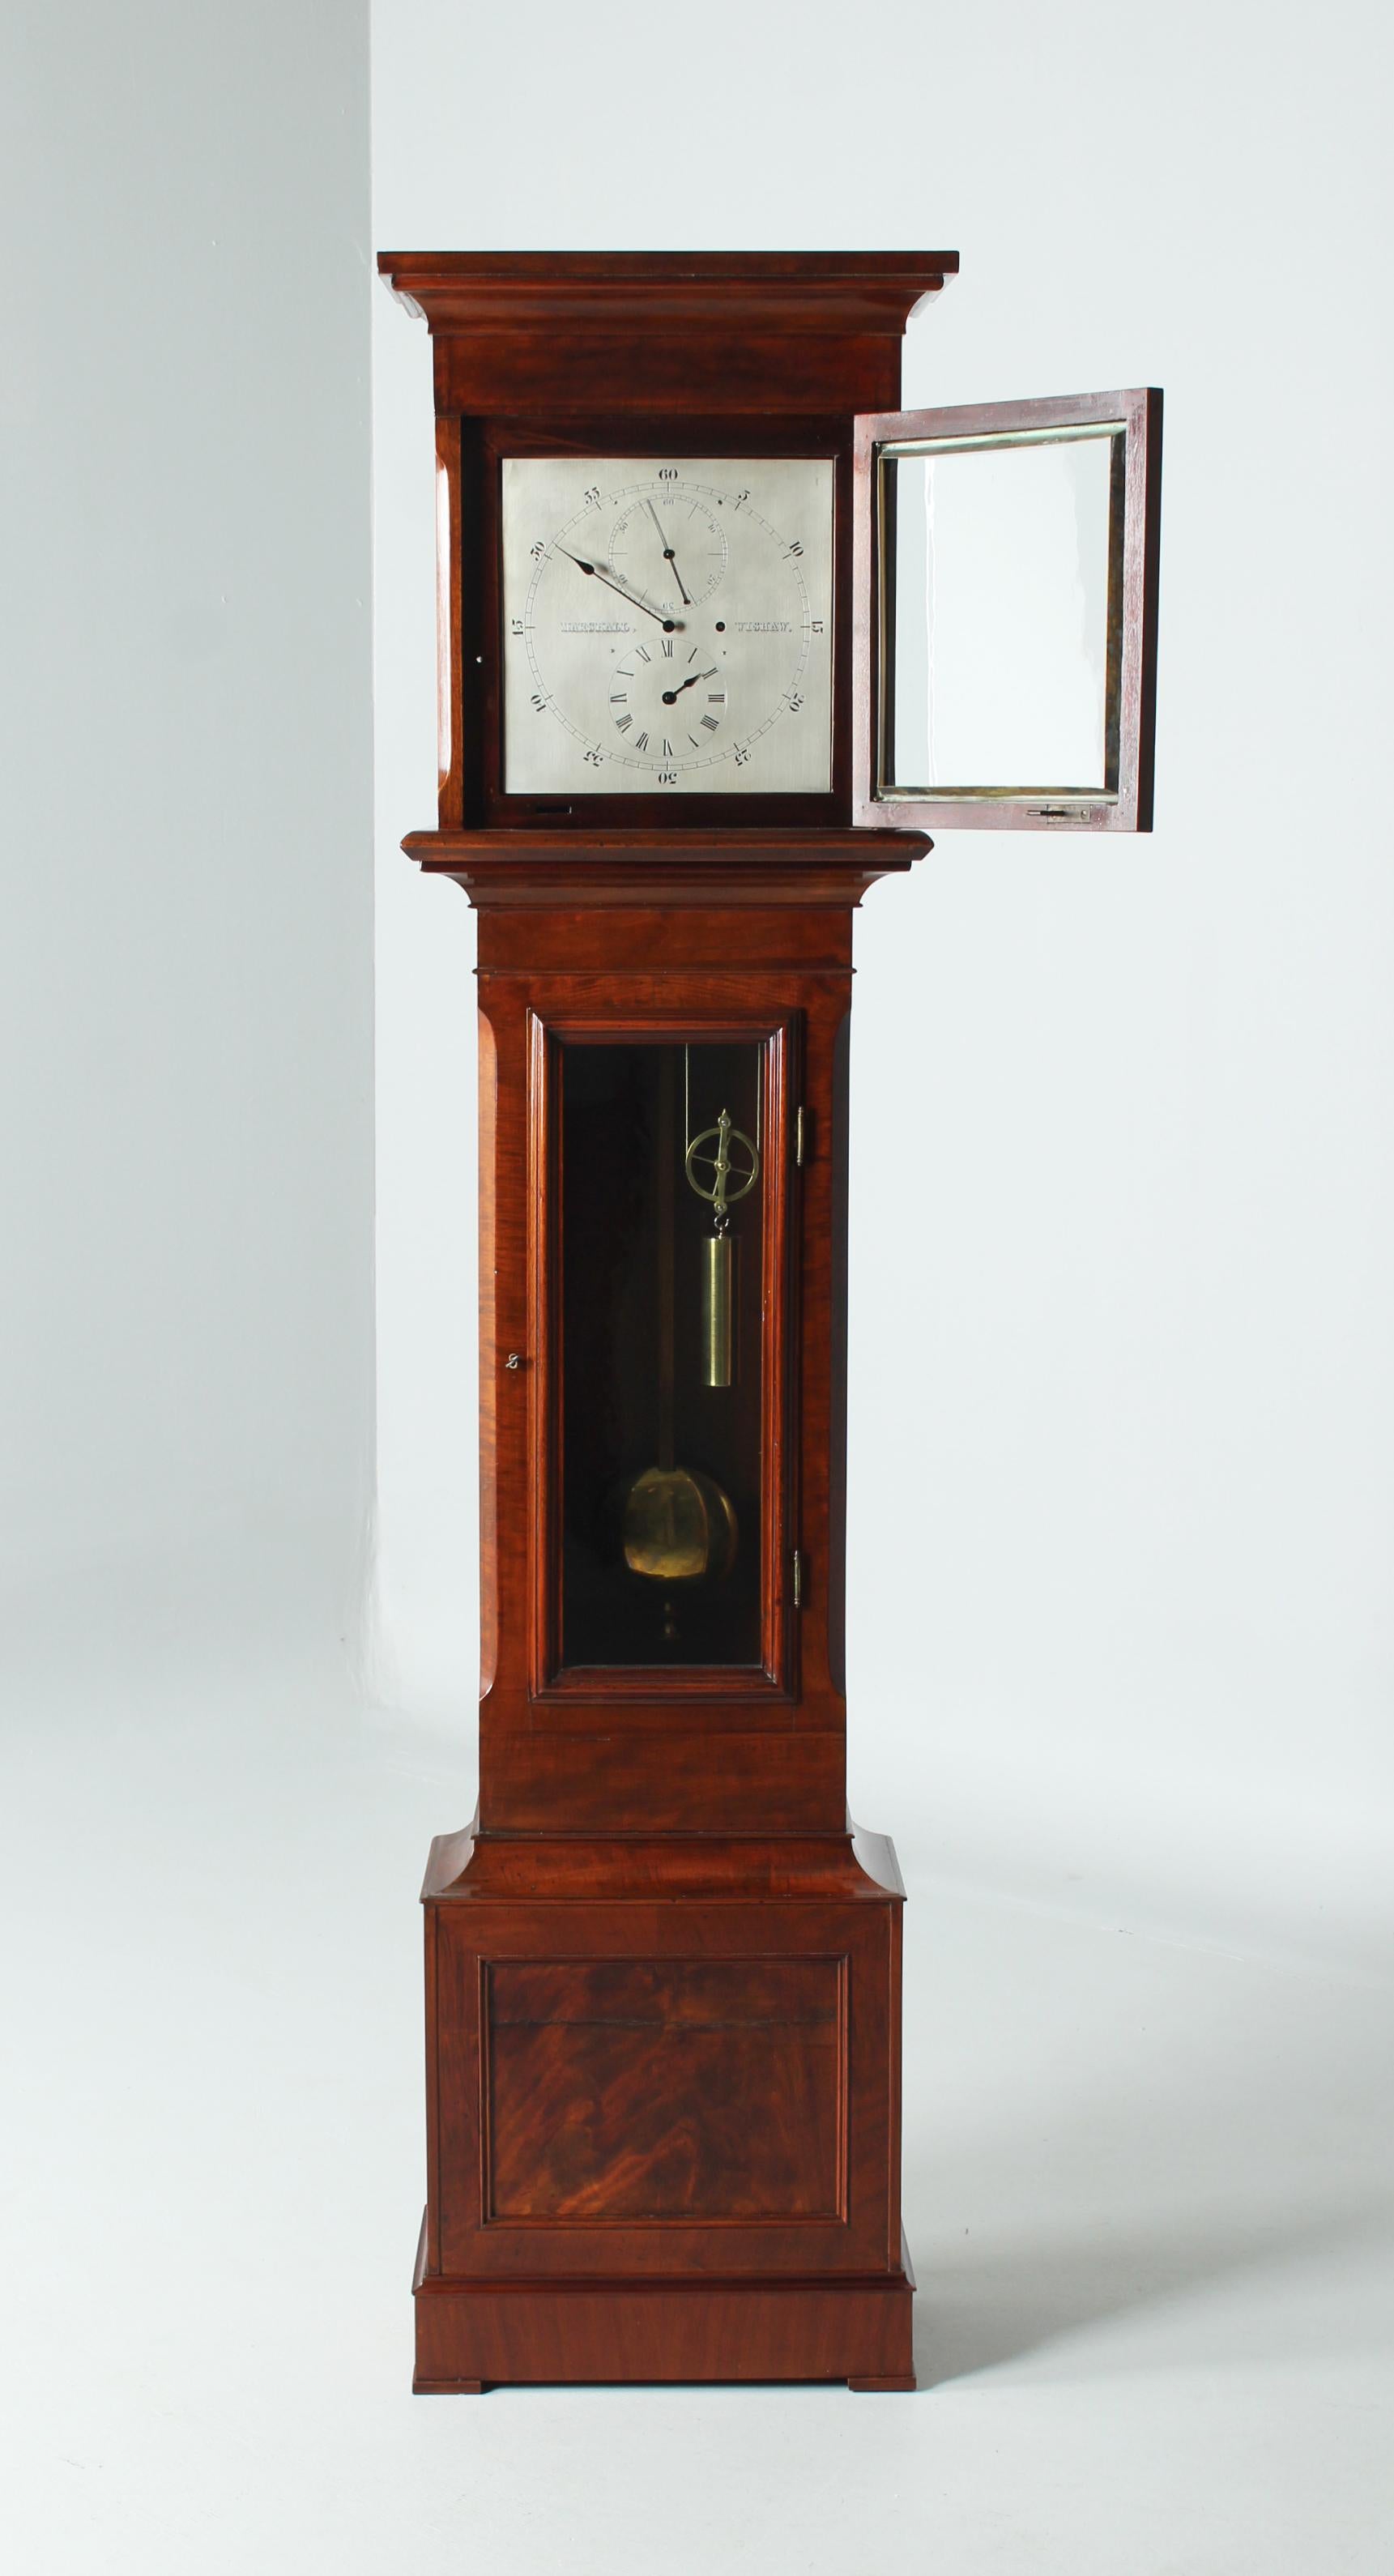 Antique precision regulator, grandfather clock with seconds pendulum

Scotland
Mahogany, brass
First half 19th century

Dimensions: H x W x D: 202 x 50 x 25 cm

Description:
Exceedingly decorative and extremely high quality finished seconds pendulum